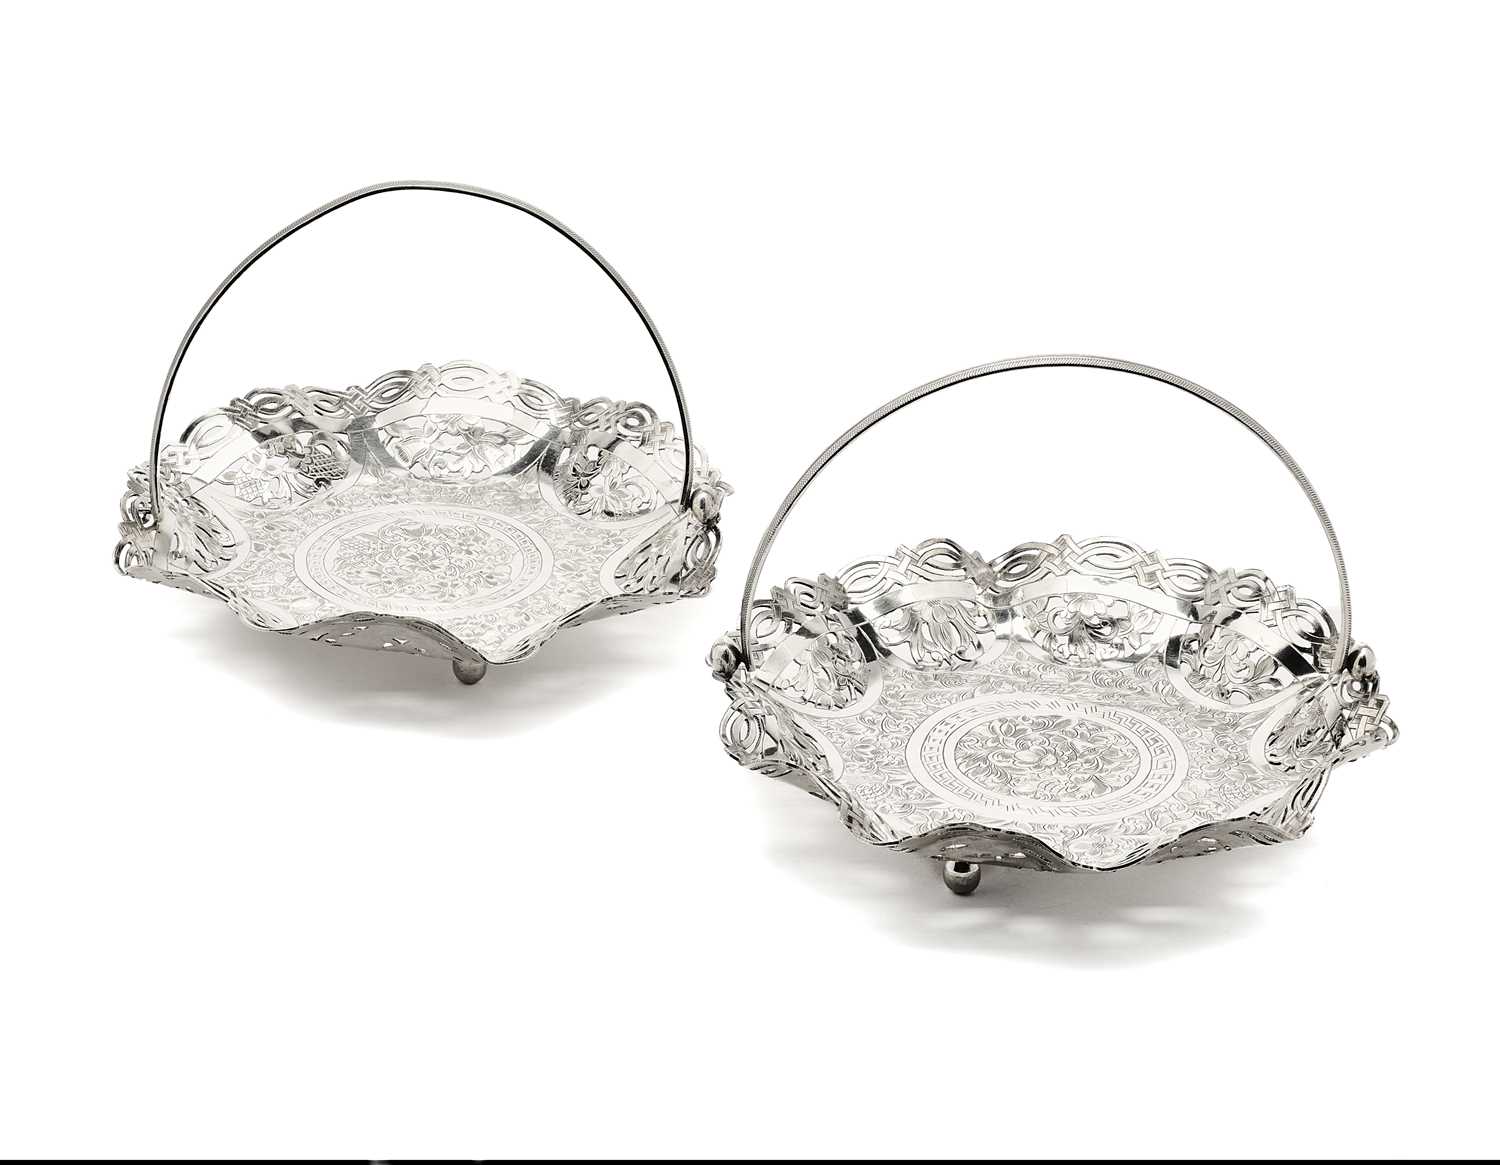 Lot 62 - A PAIR OF IRANI SWEETMEAT BASKETS, PROBABLY ISFAHAN, 20TH CENTURY